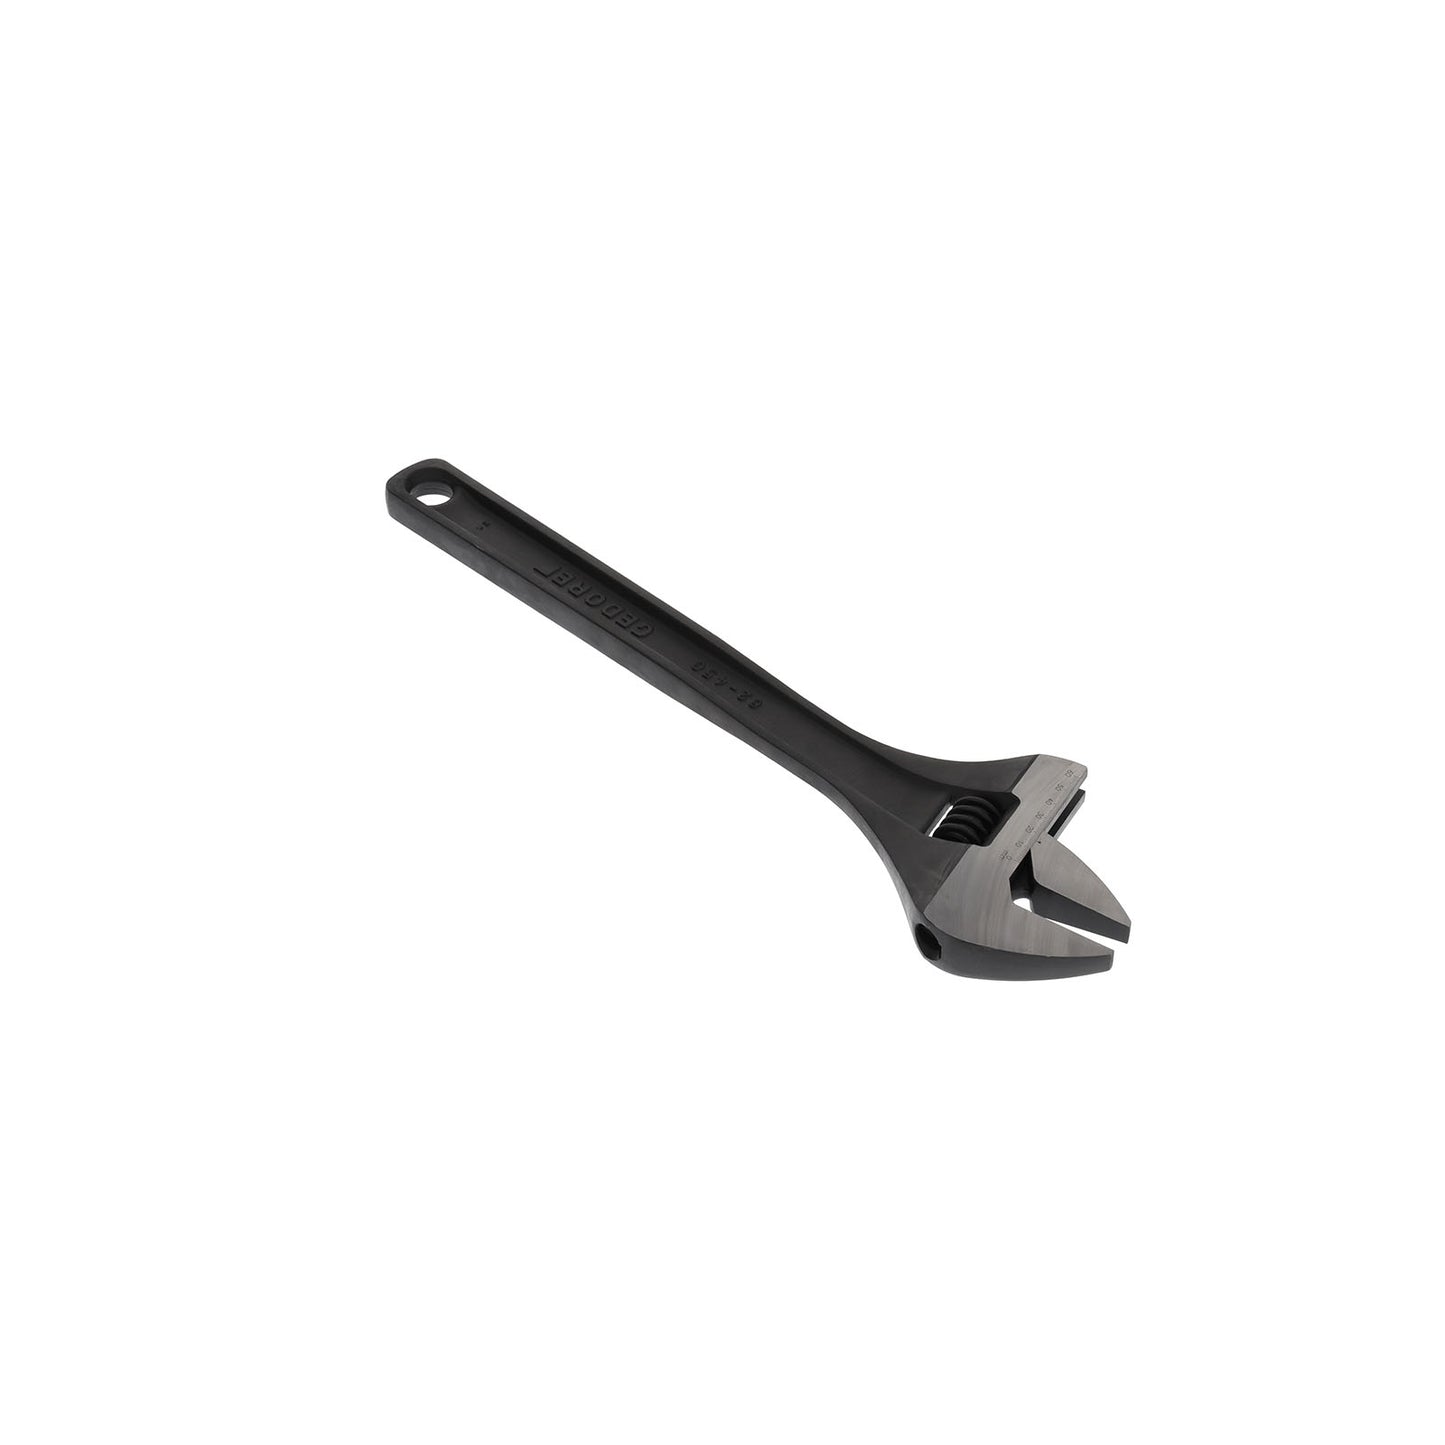 GEDORE 62 P 18 - Phosphated Adjustable Wrench, 18" (6368510)